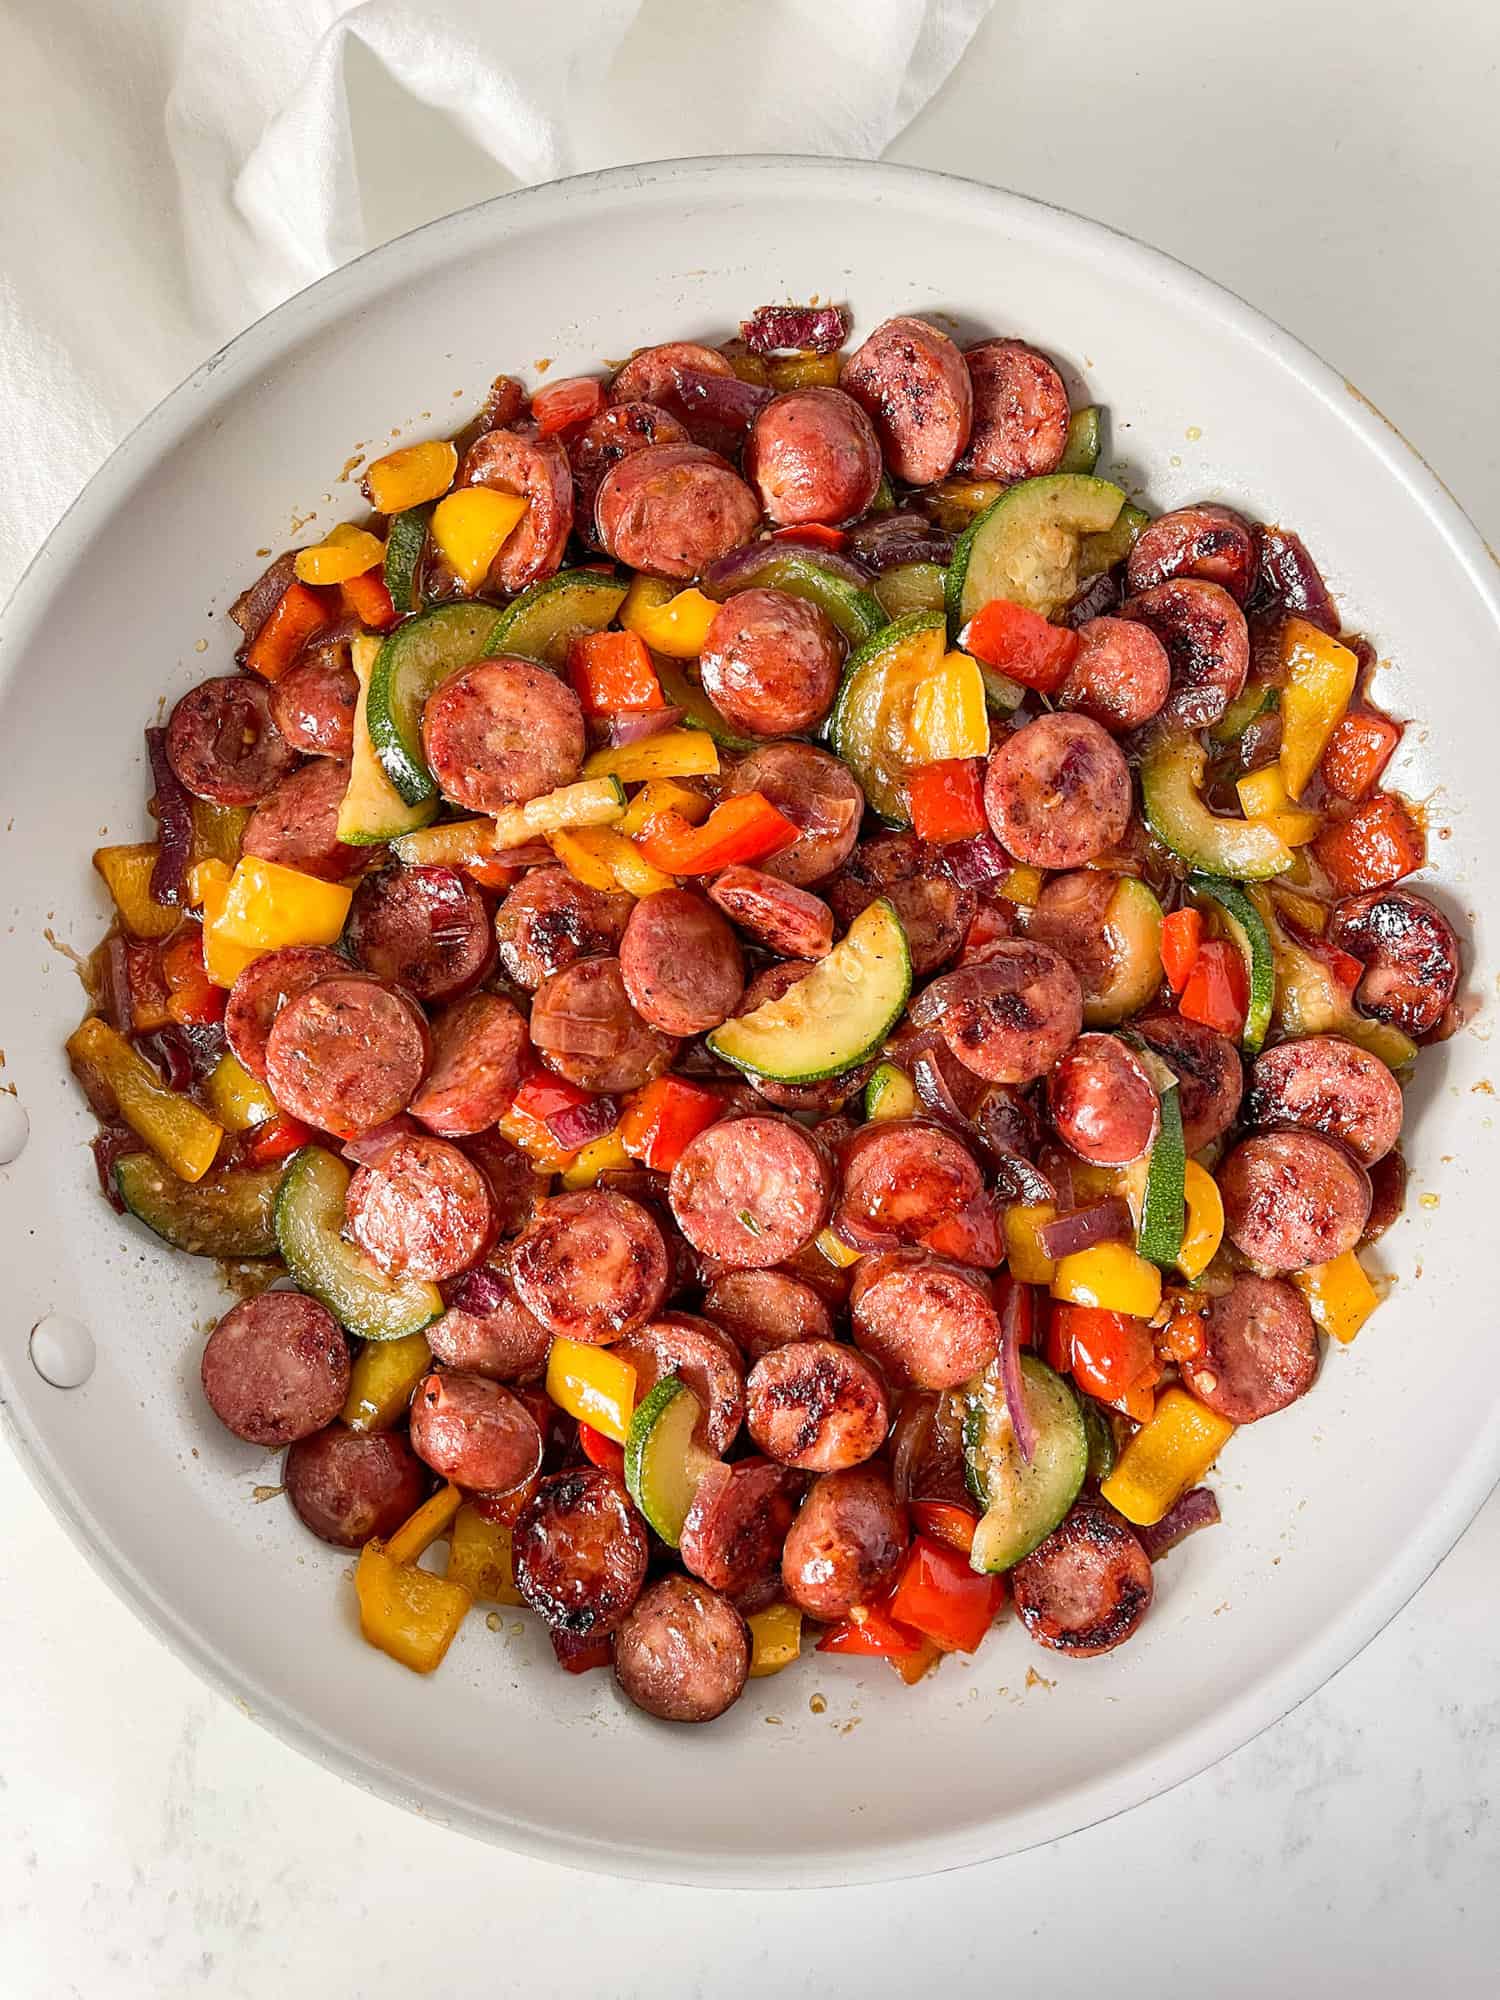 Cooked chicken sausage stir fry with vegetables